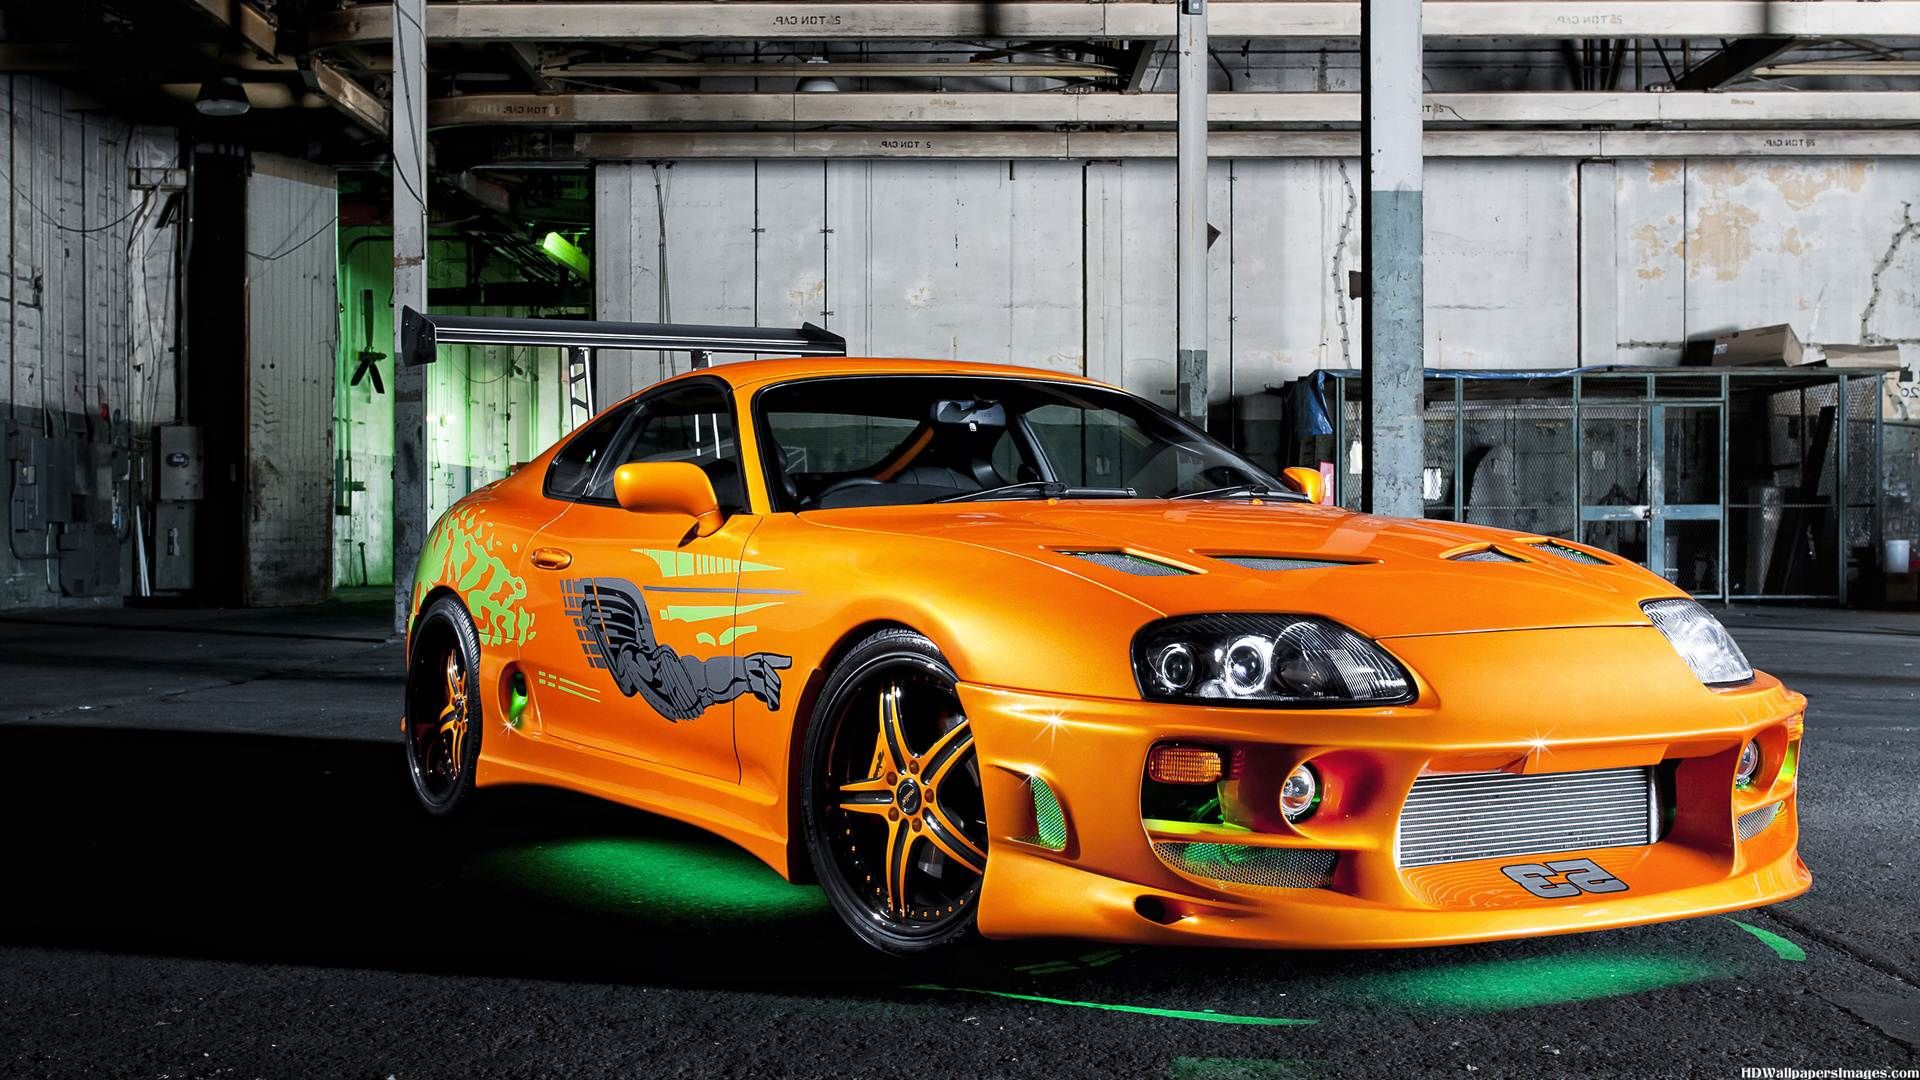 Toyota Supra Fast And Furious HD Wallpaper 4t4 Org